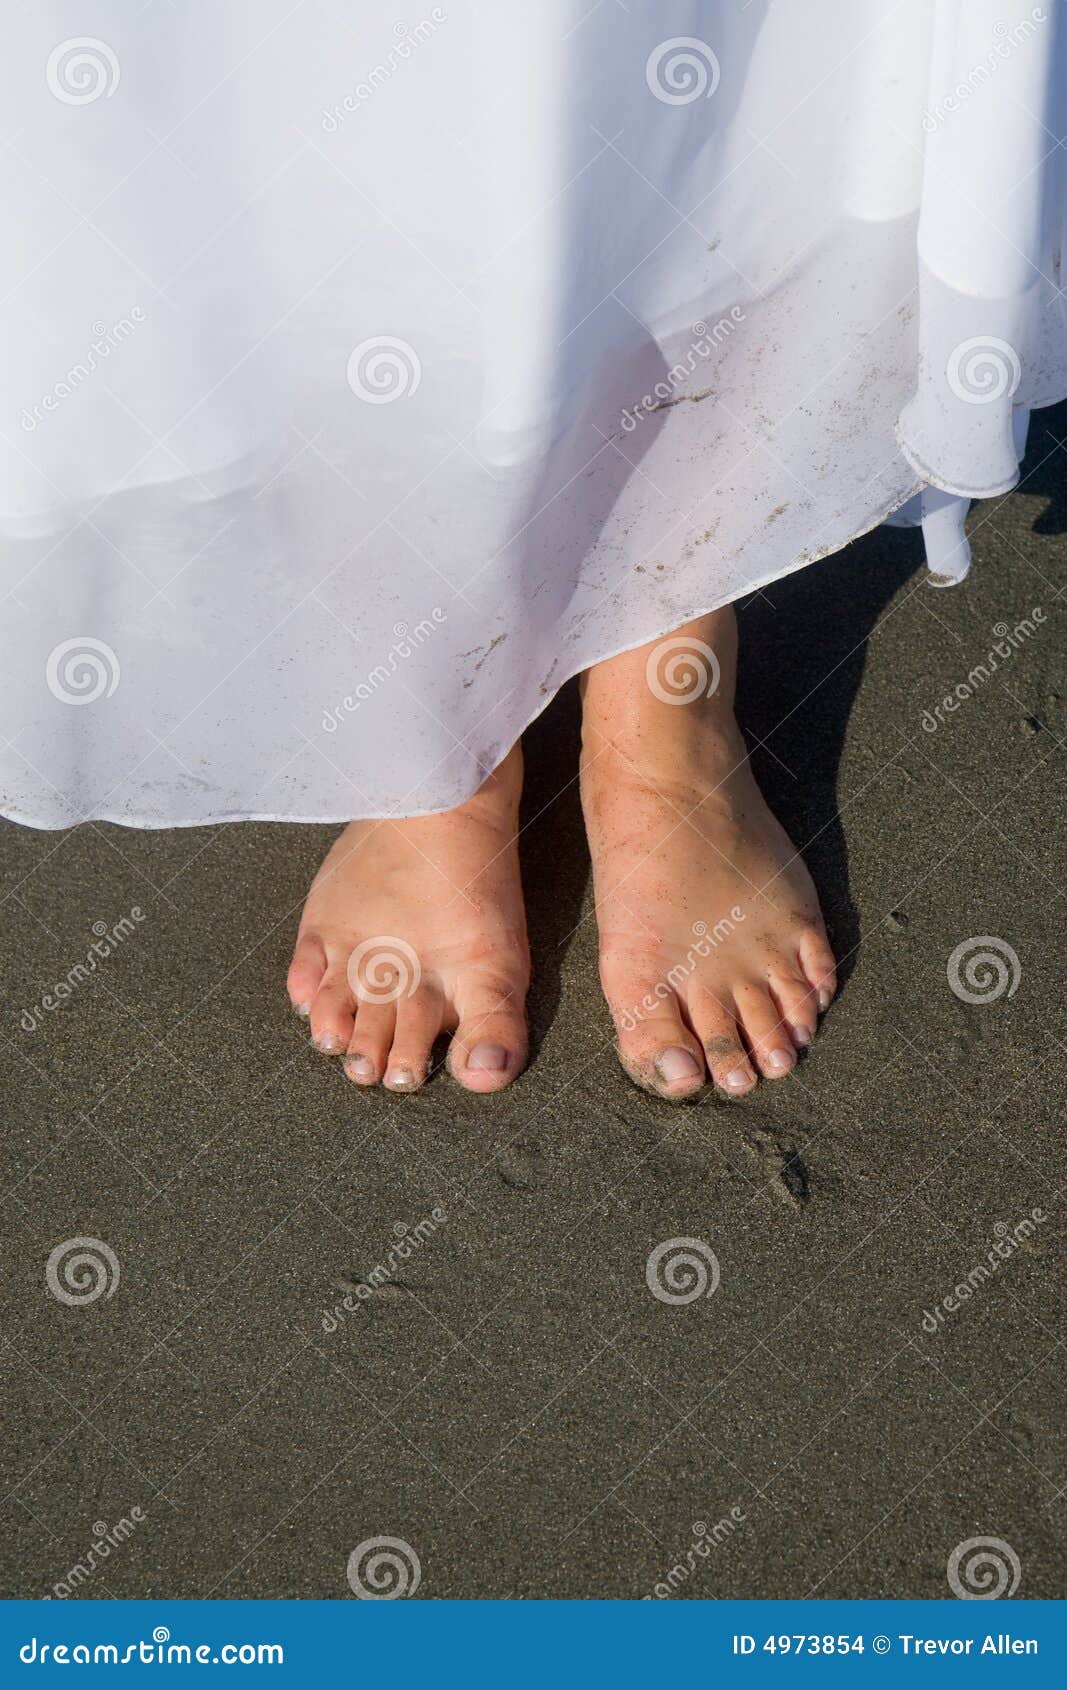 Bride's Feet Stock Images - Image: 4973854